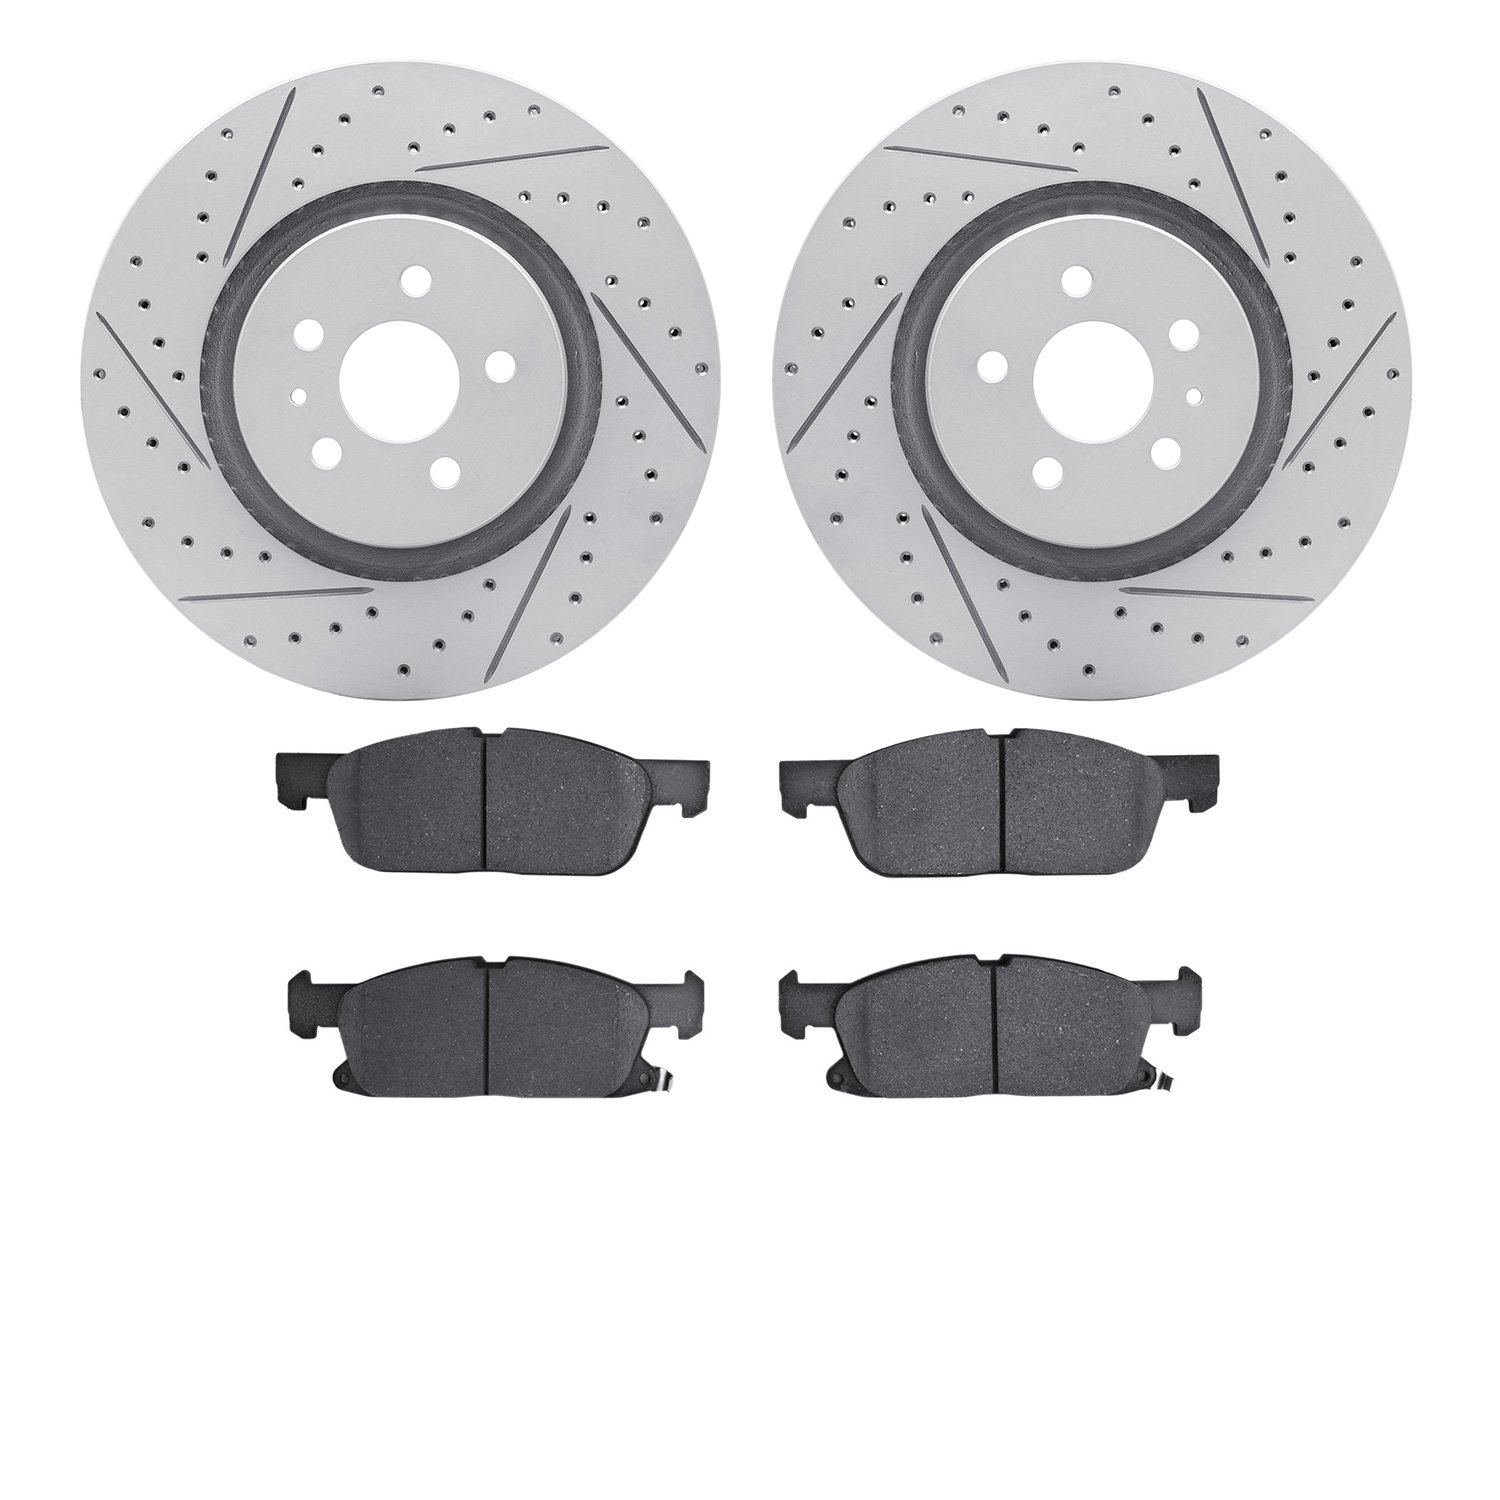 2502-55002 Geoperformance Drilled/Slotted Rotors w/5000 Advanced Brake Pads Kit, 2017-2020 Ford/Lincoln/Mercury/Mazda, Position: